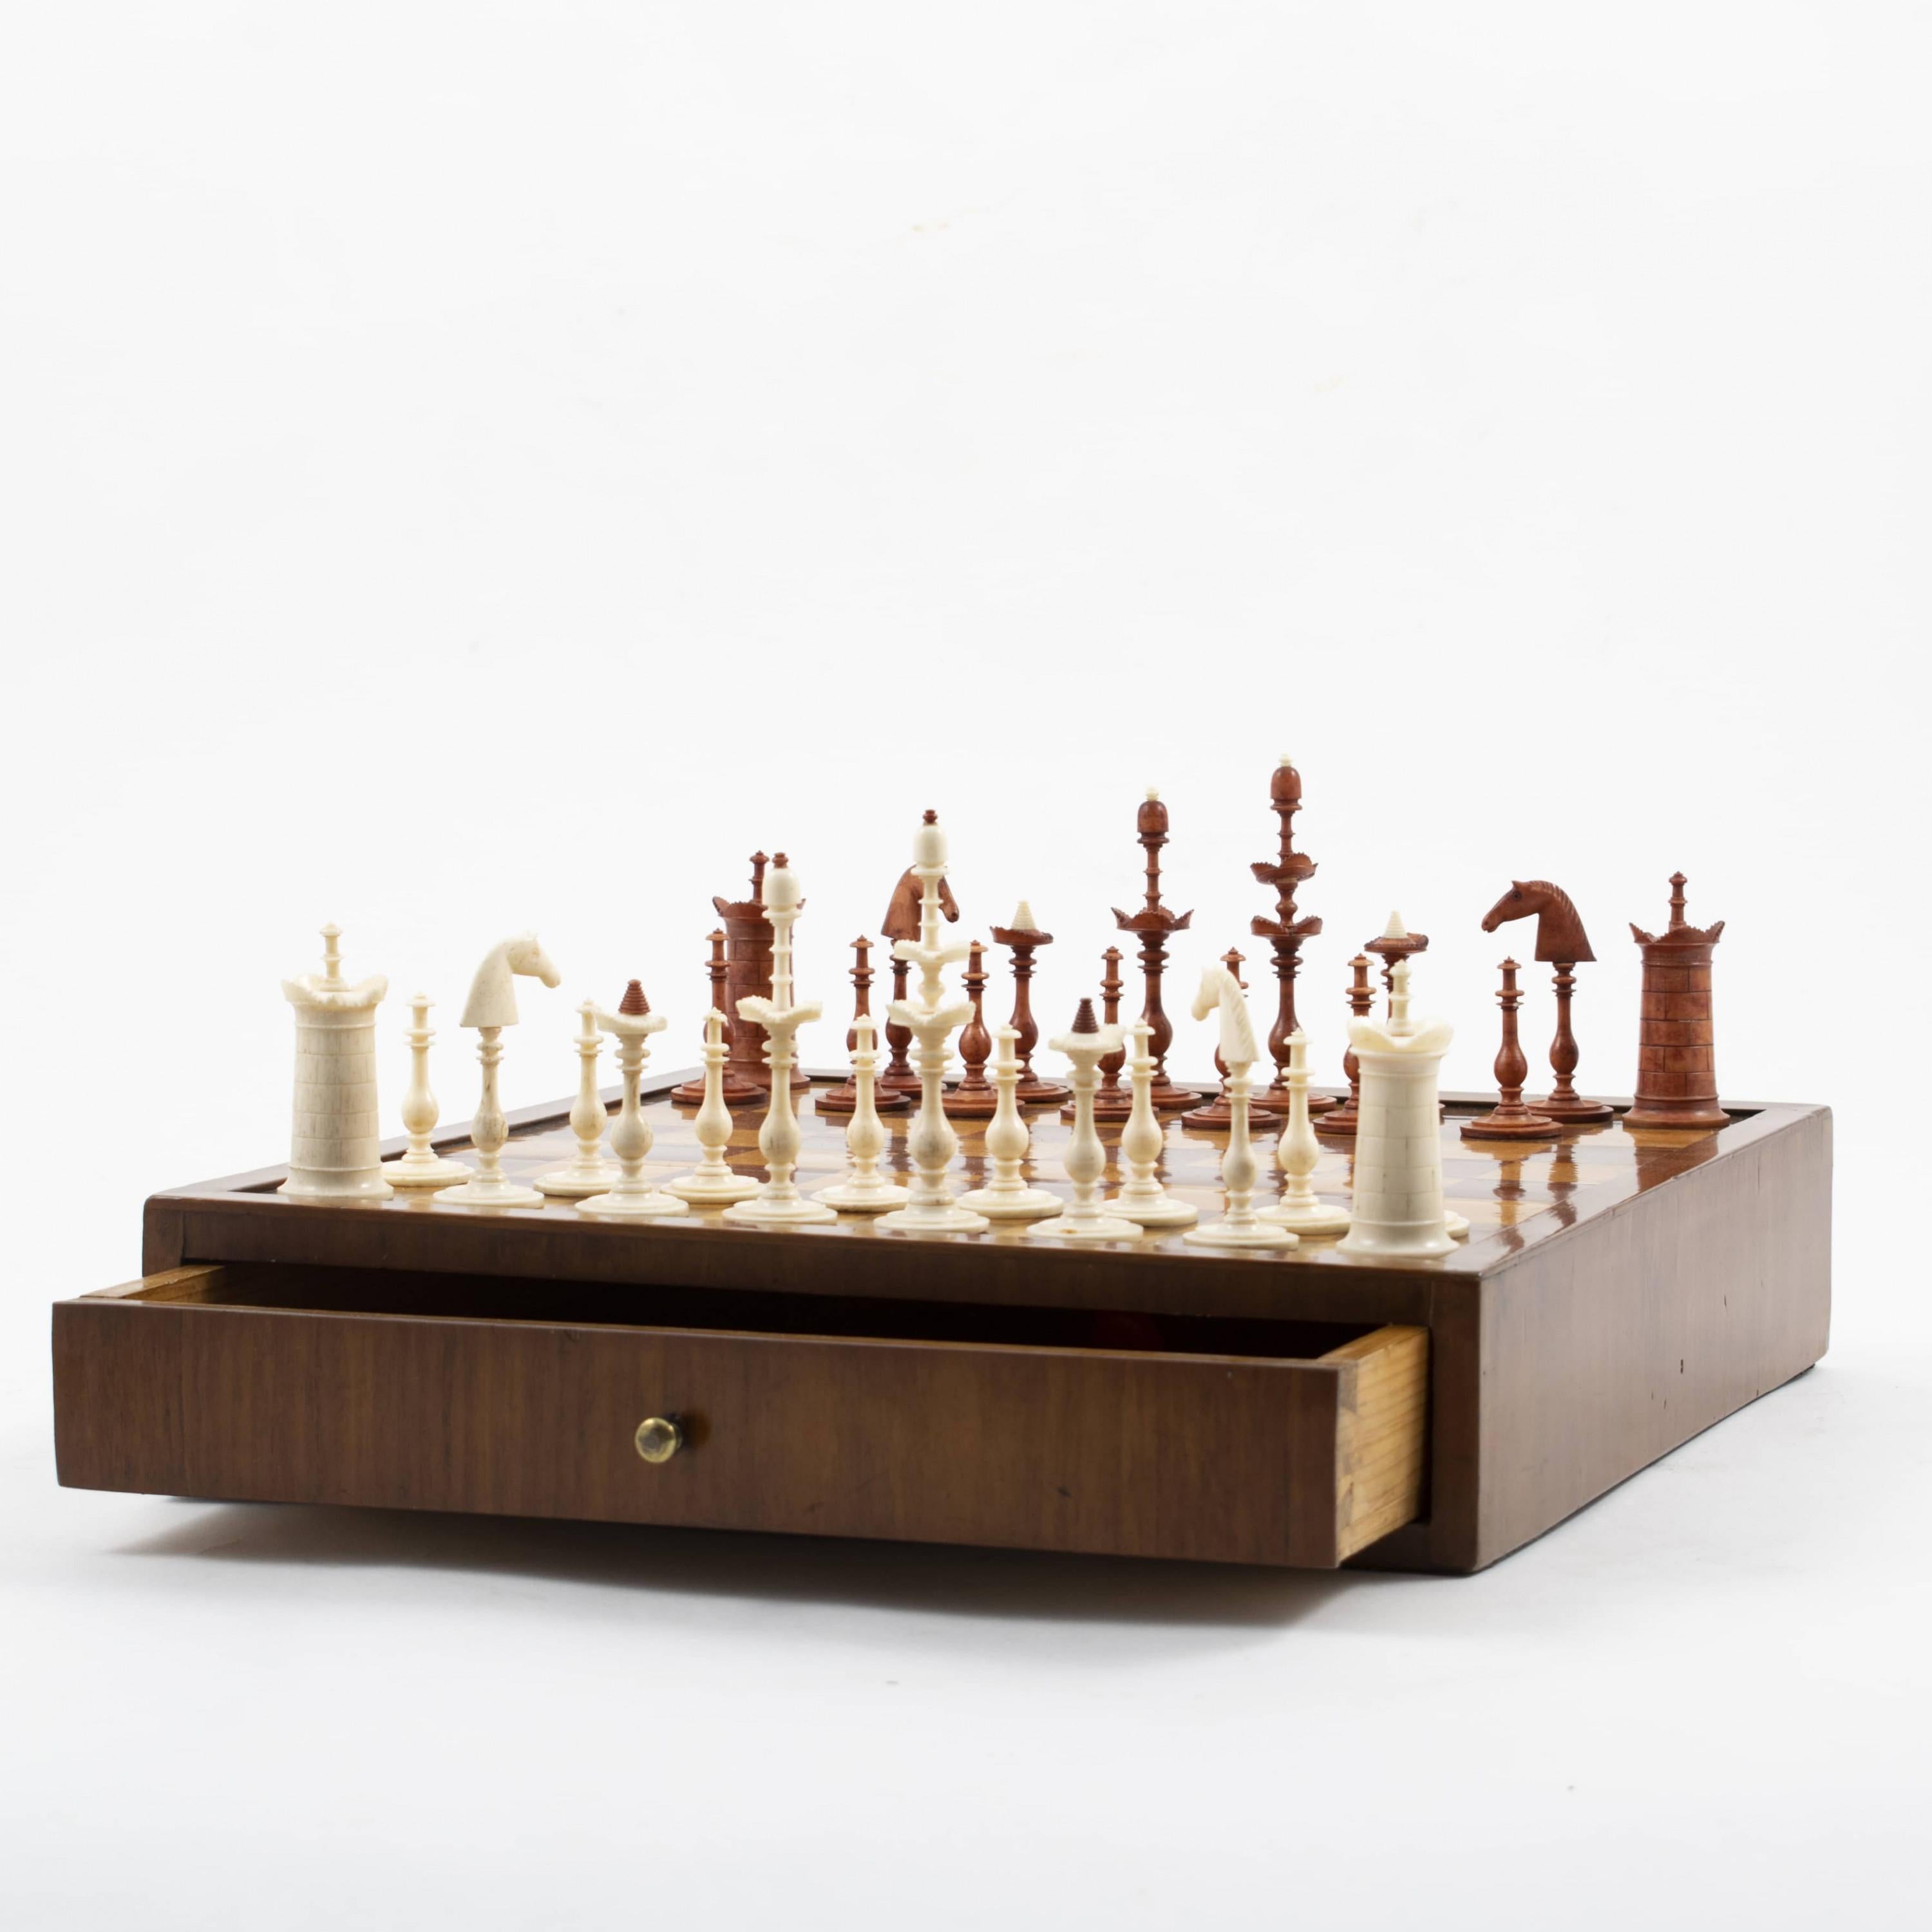 Early 19th century Empire mahogany chess set with drawer.
Checkerboard with inlaid squares of mahogany and satinwood.
The chess set is complete with 32 original hand-carved pieces, red and white.
Copenhagen, Denmark 1810.

Height with the